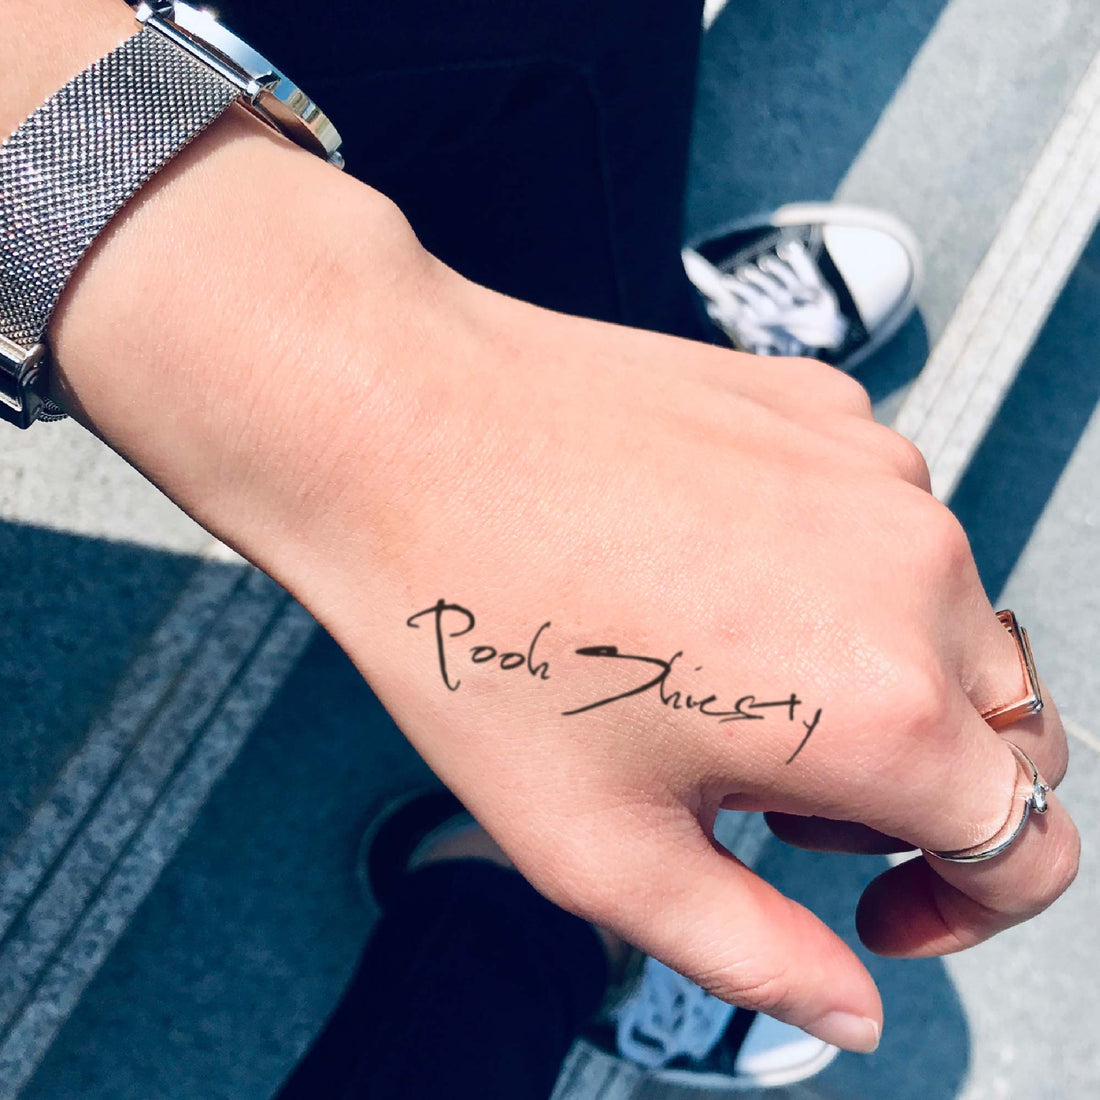 Pooh Shiesty custom temporary tattoo sticker design idea inspiration meanings removal arm wrist hand words font name signature calligraphy lyrics tour concert outfits merch accessory gift souvenir costumes wear dress up code